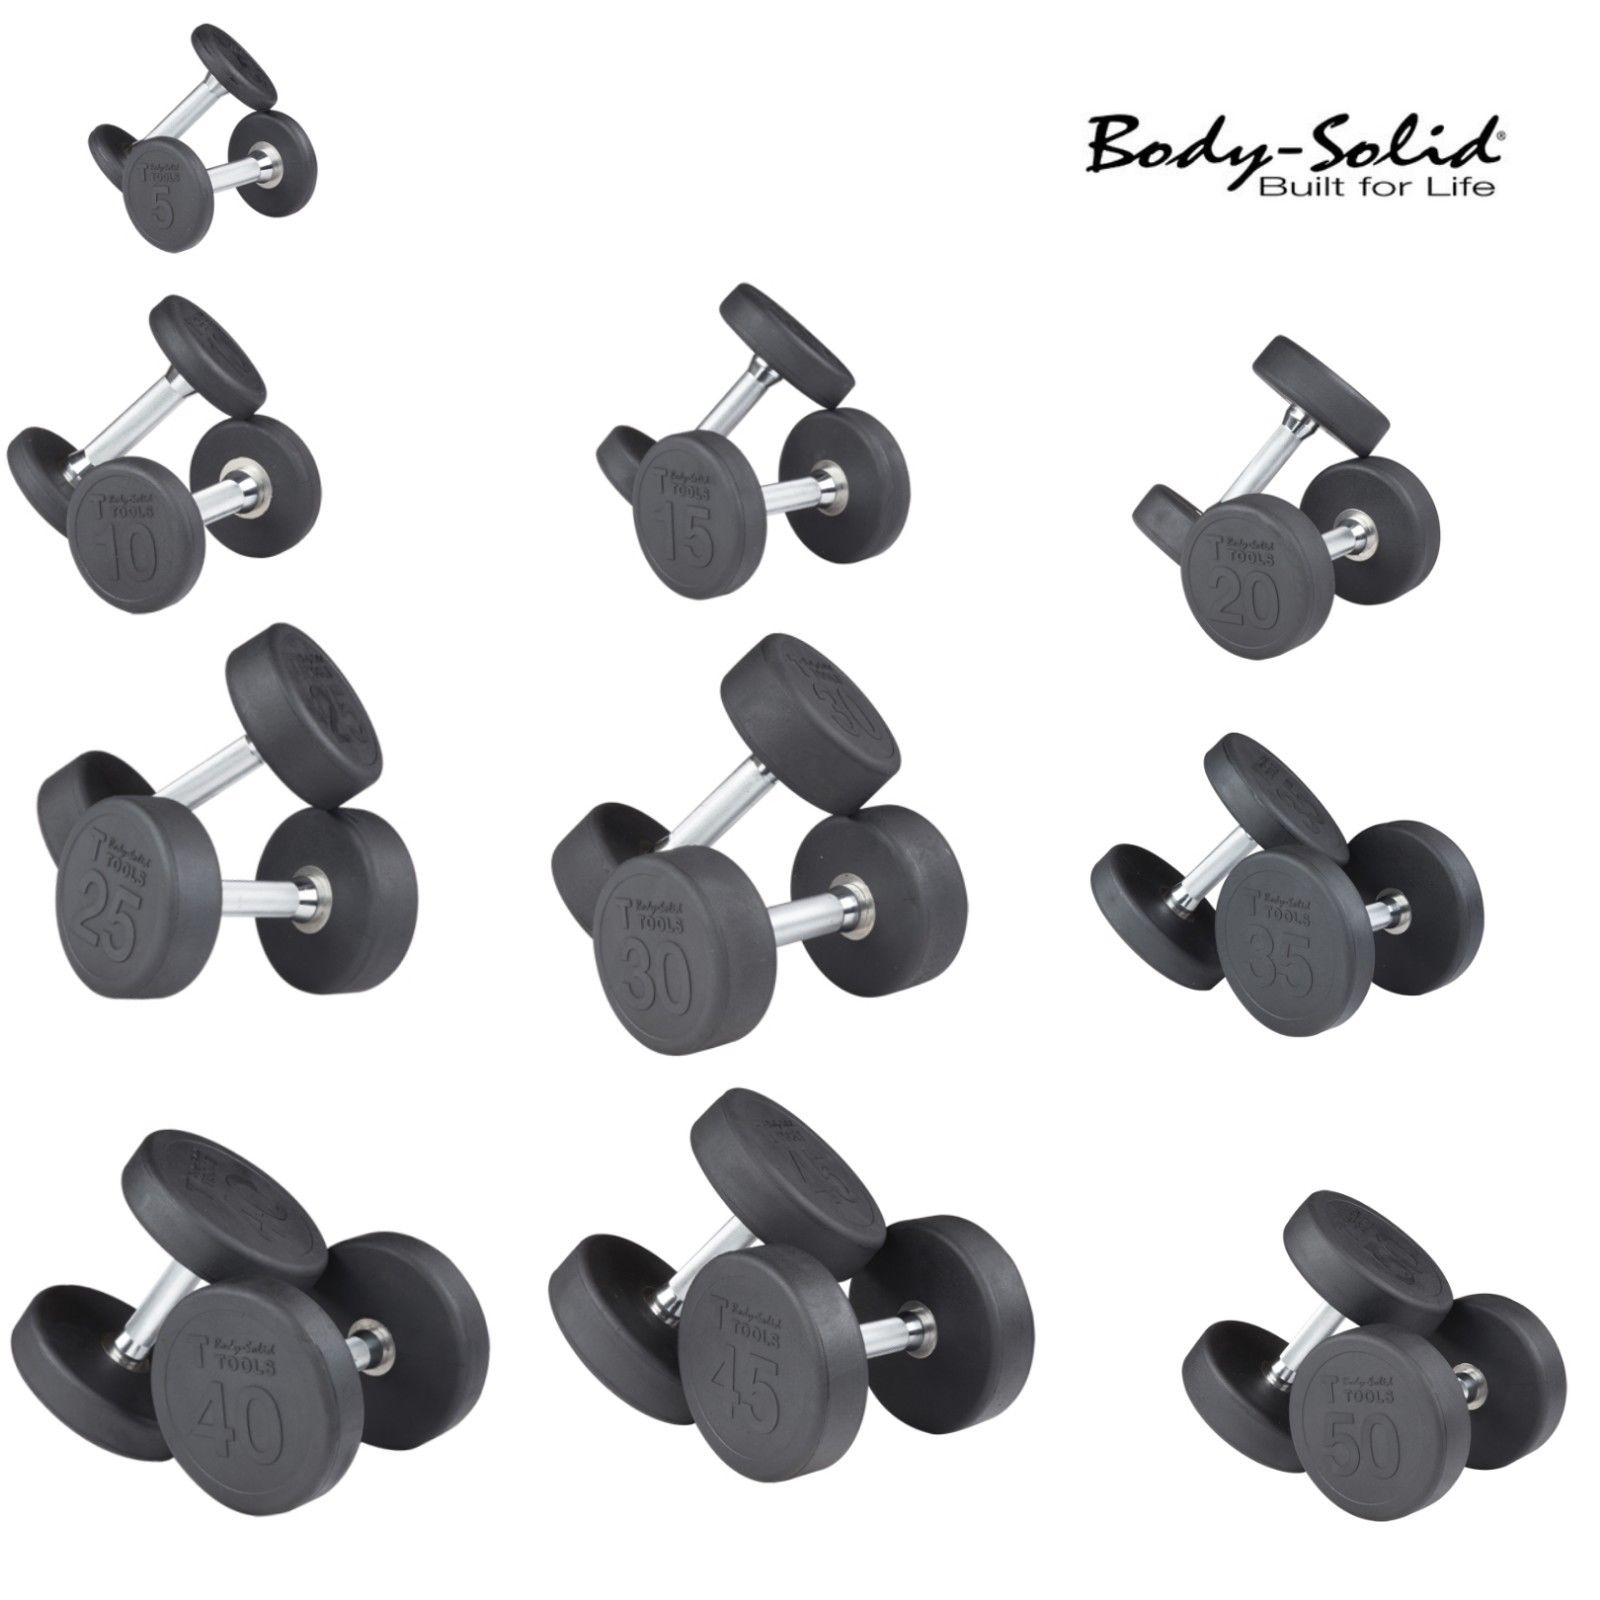 Rubber Round Dumbbells 5 lb to 100 lb Body-Solid Weights SDP Sold as SINGLES